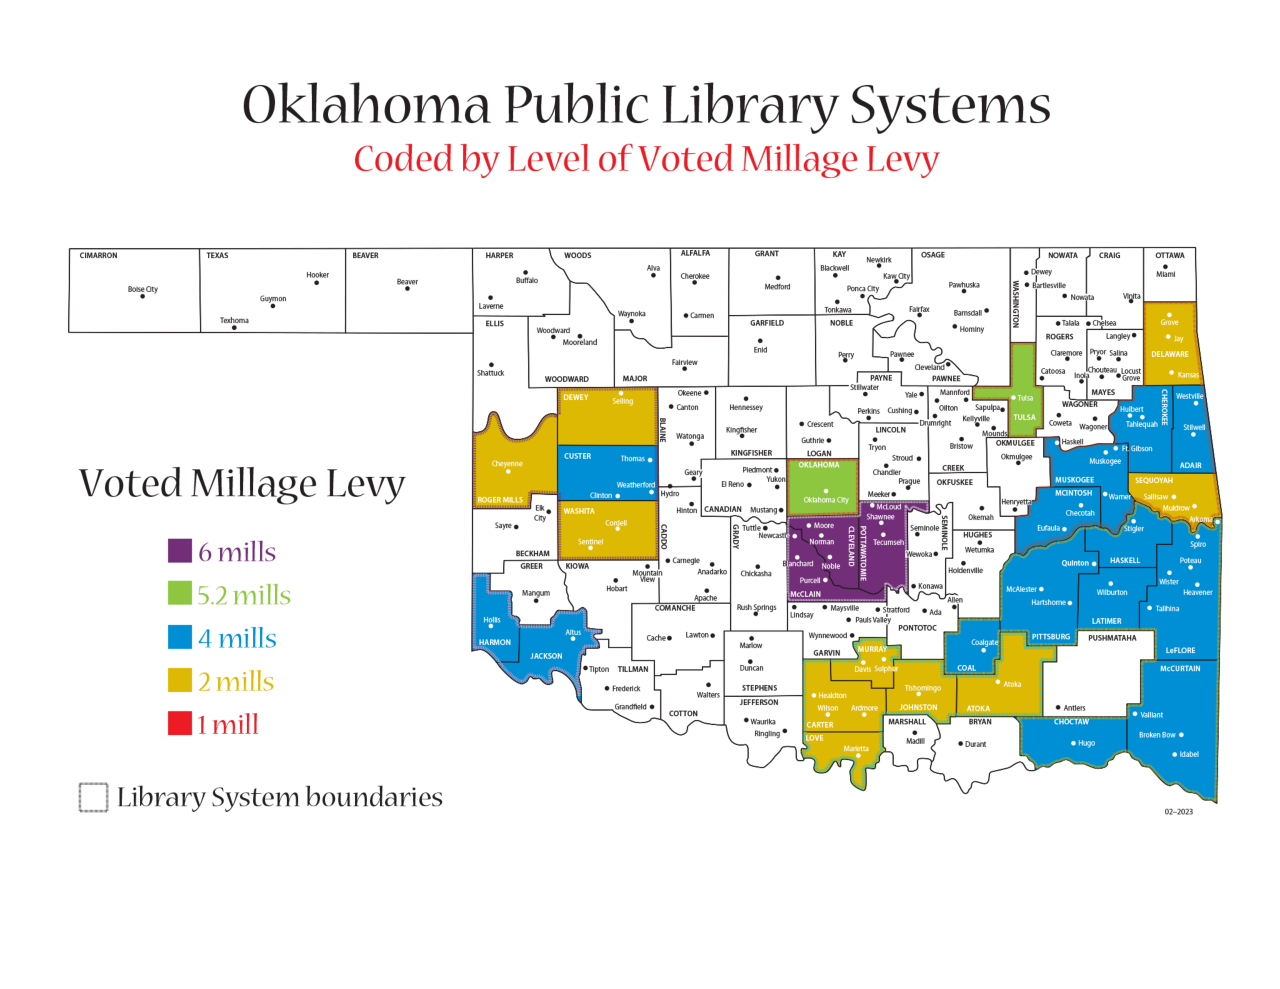 Oklahoma Public Library Systems Coded by Level of Voted Millage Levy